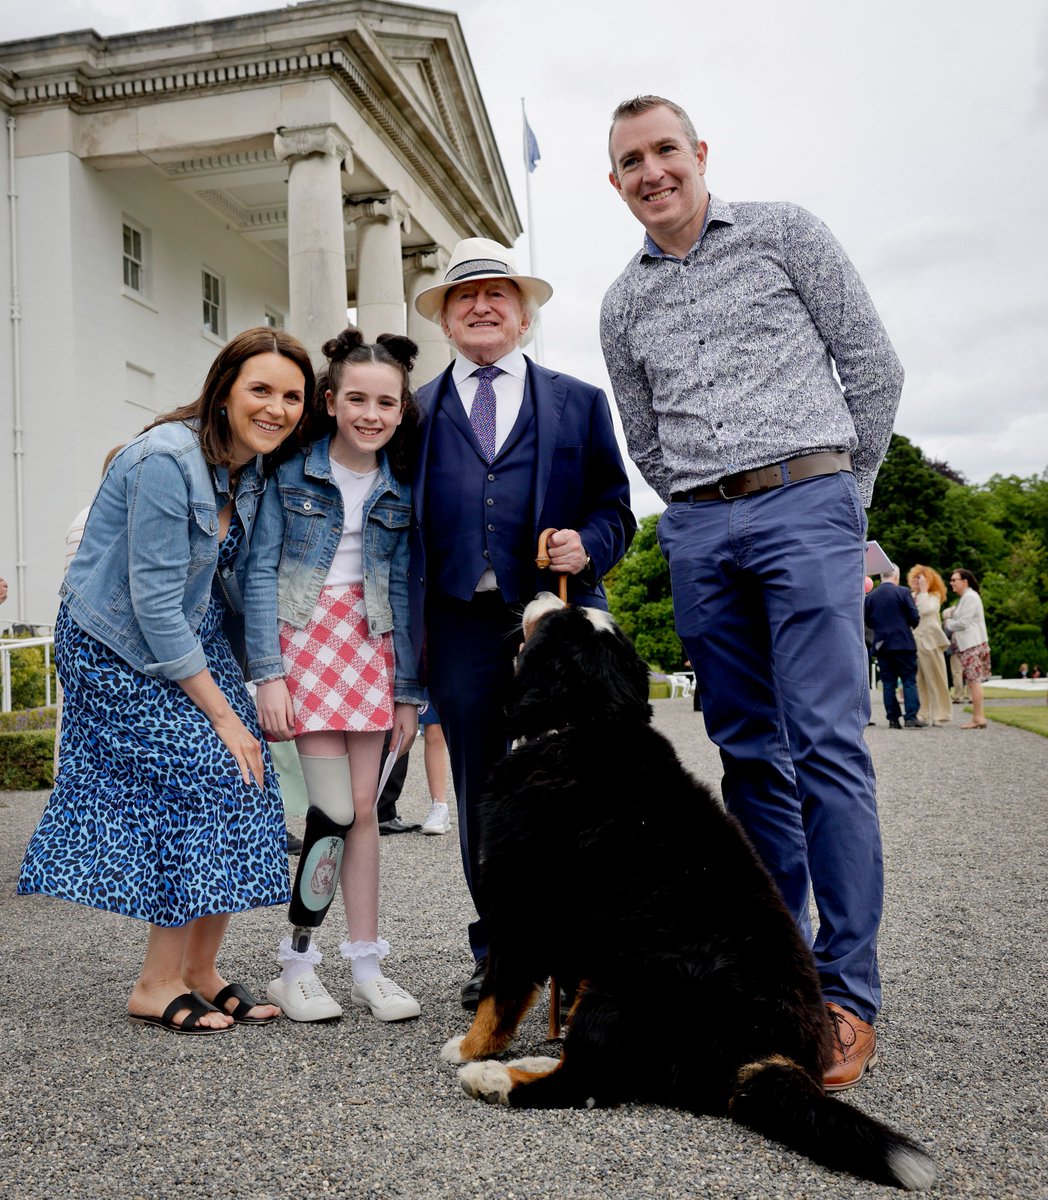 President Higgins has sent his deepest condolences to the family of Saoírse Ruane from Kiltullagh, Co. Galway, following her passing at the age of 12. Saoírse's strength and warmth was an inspiration to all